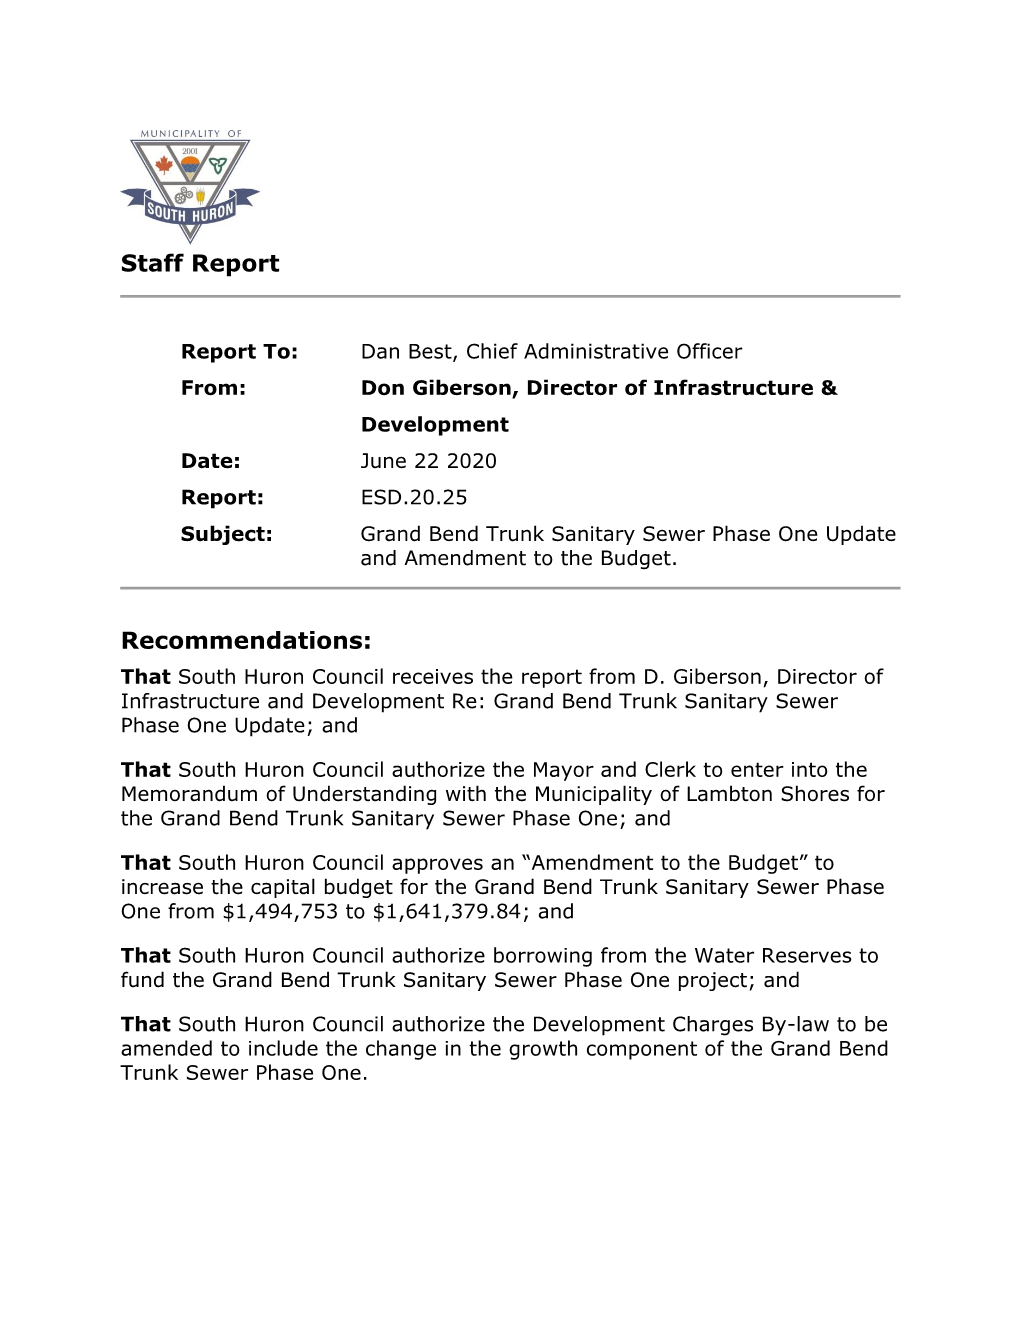 Grand Bend Trunk Sanitary Sewer Phase One Update and Amendment to the Budget